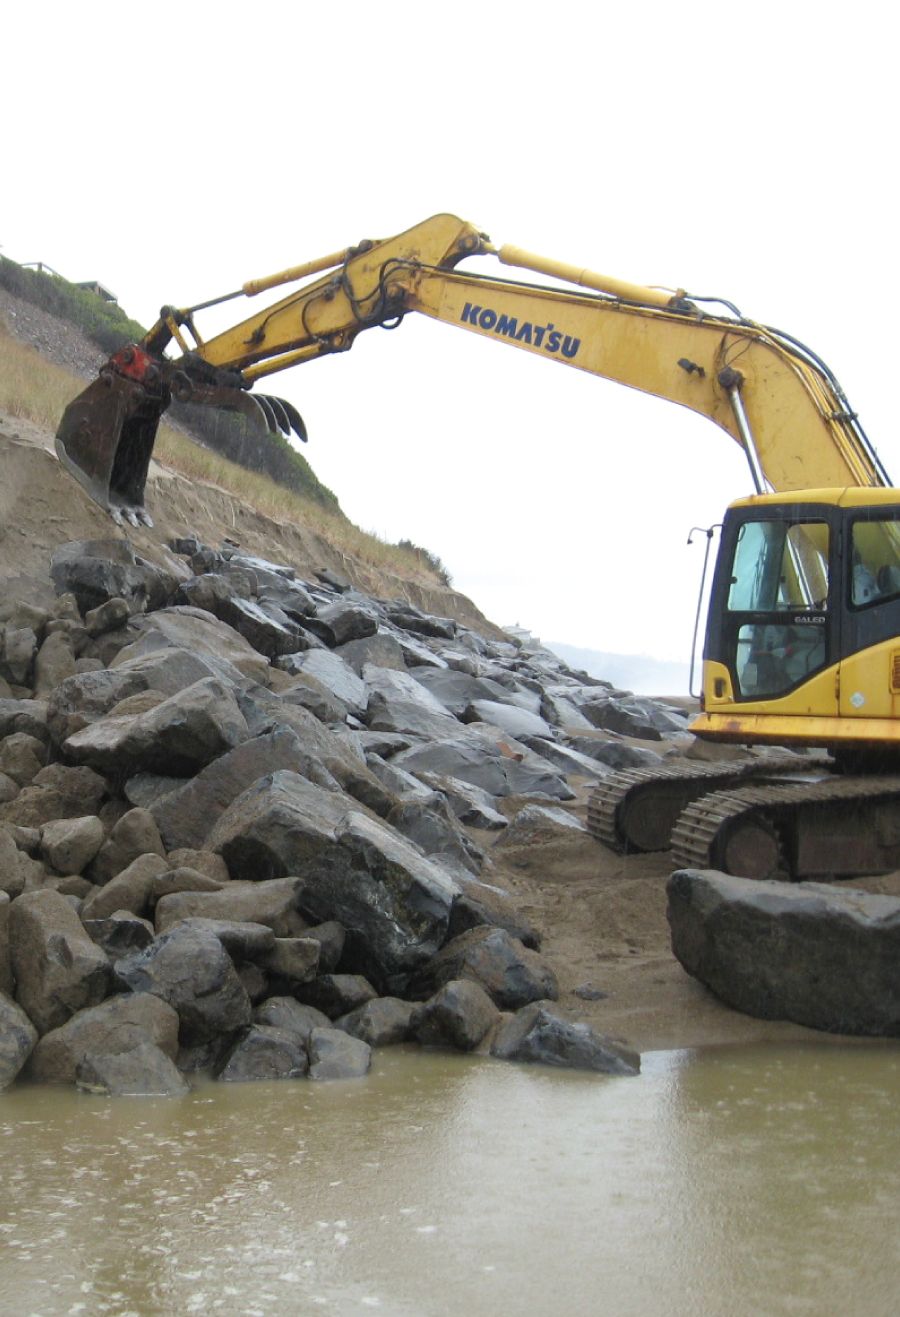 revetment services img loader in the water